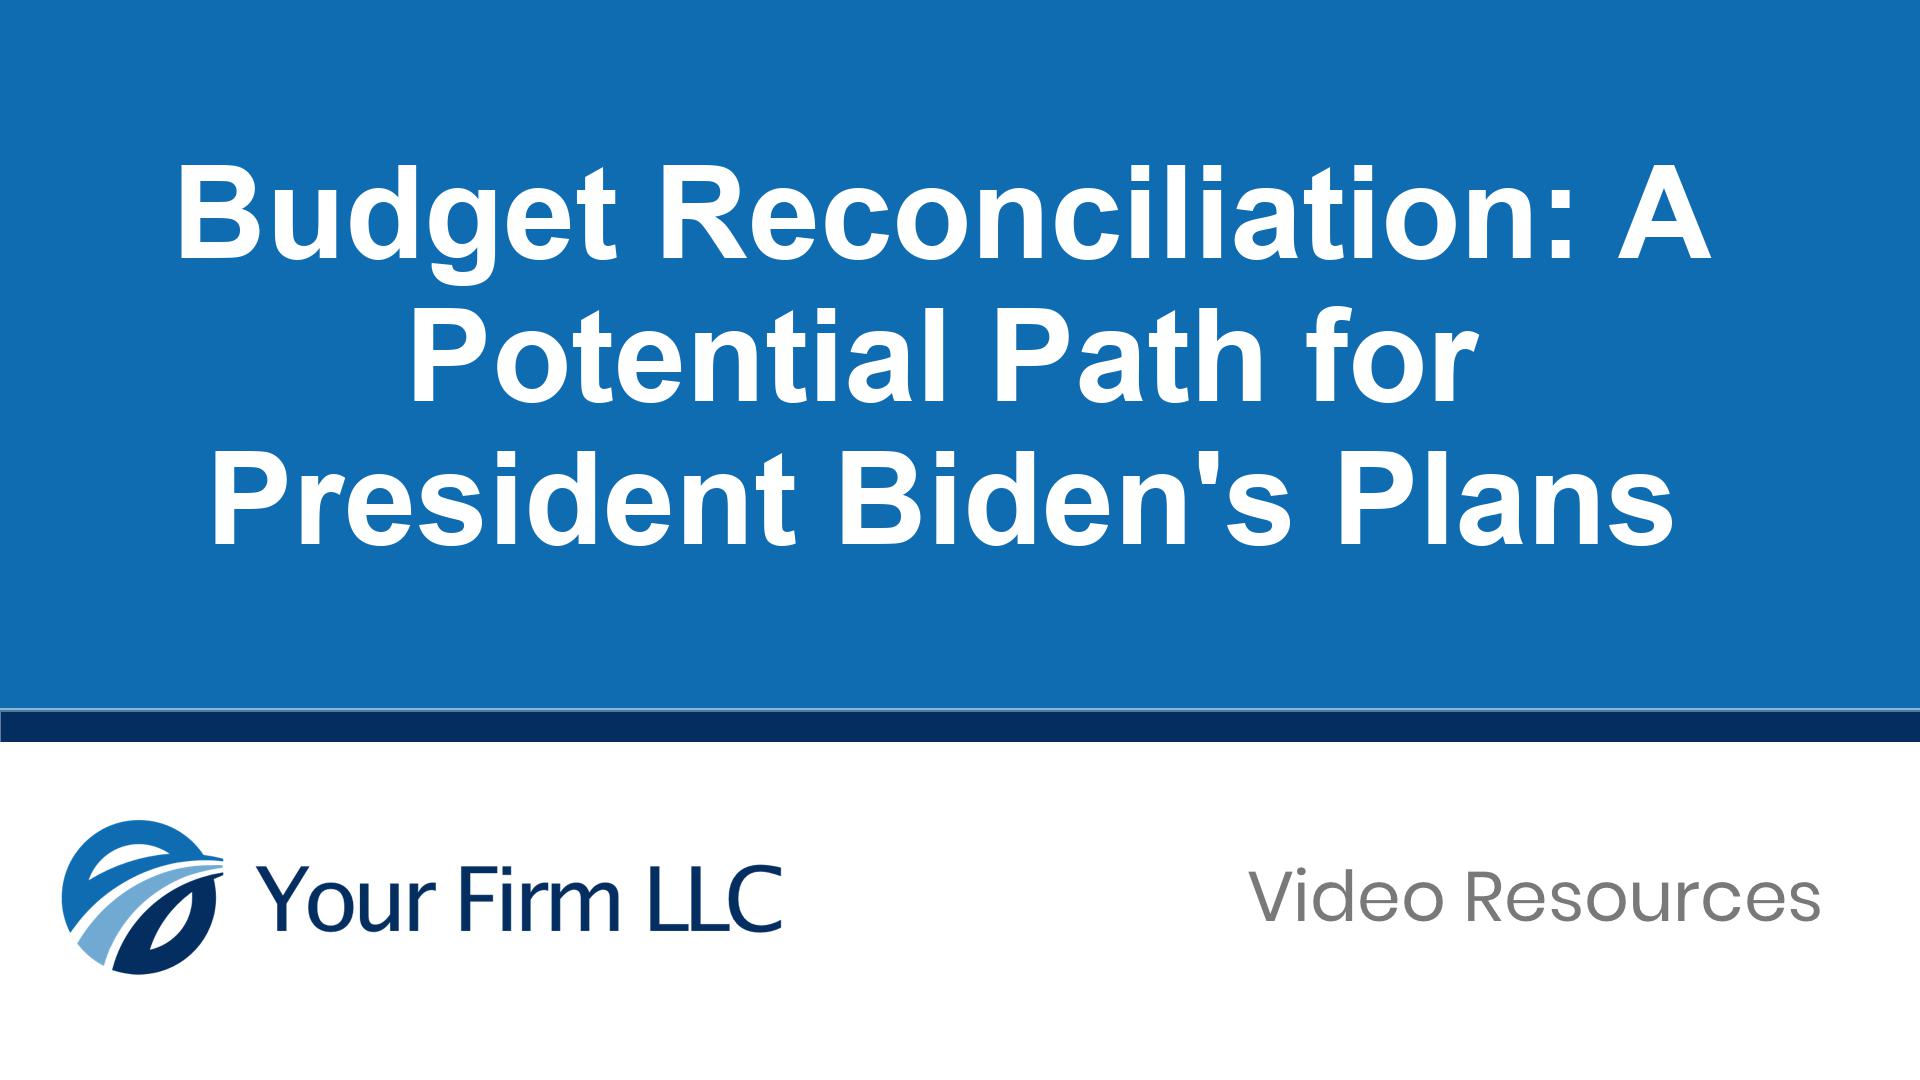 Budget Reconciliation – A Potential Path for President Bidens Plans